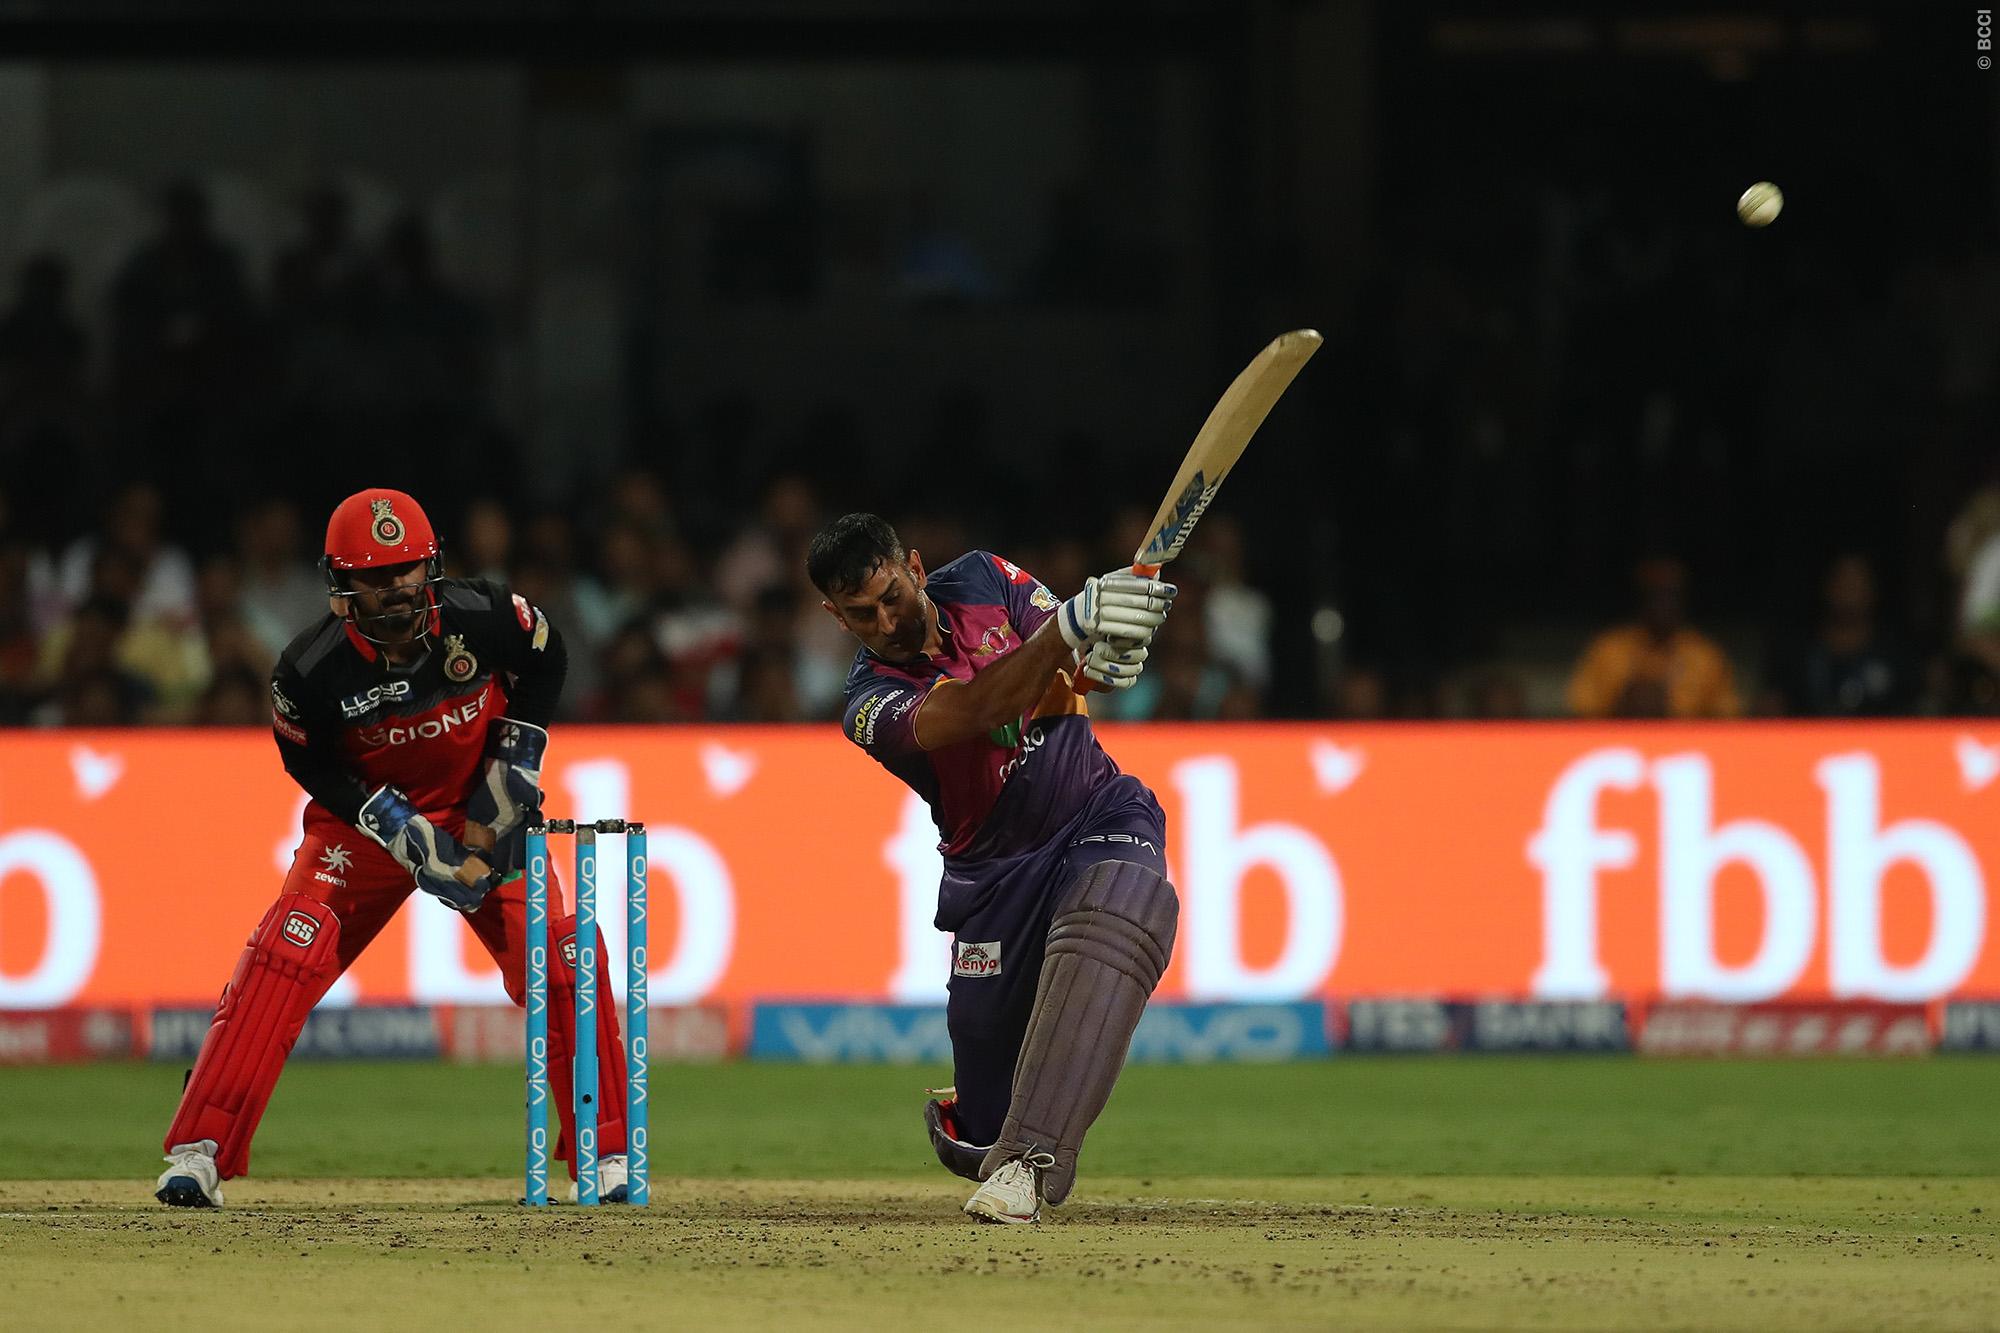 Watch Royal Challengers Bangalore vs Rising Pune Supergiants Highlights